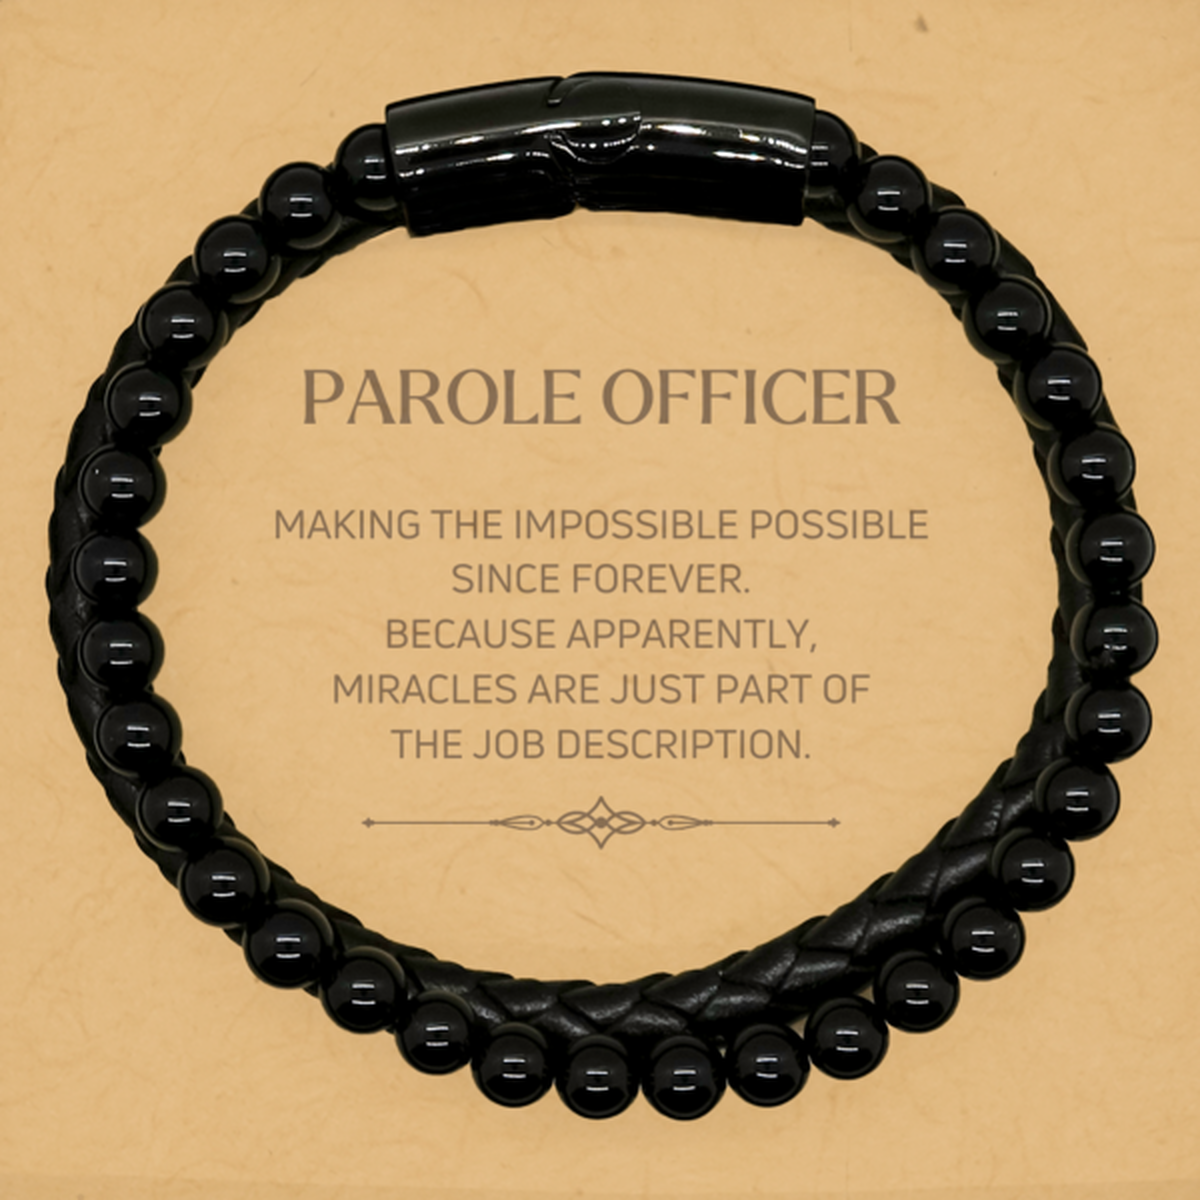 Funny Parole Officer Gifts, Miracles are just part of the job description, Inspirational Birthday Stone Leather Bracelets For Parole Officer, Men, Women, Coworkers, Friends, Boss